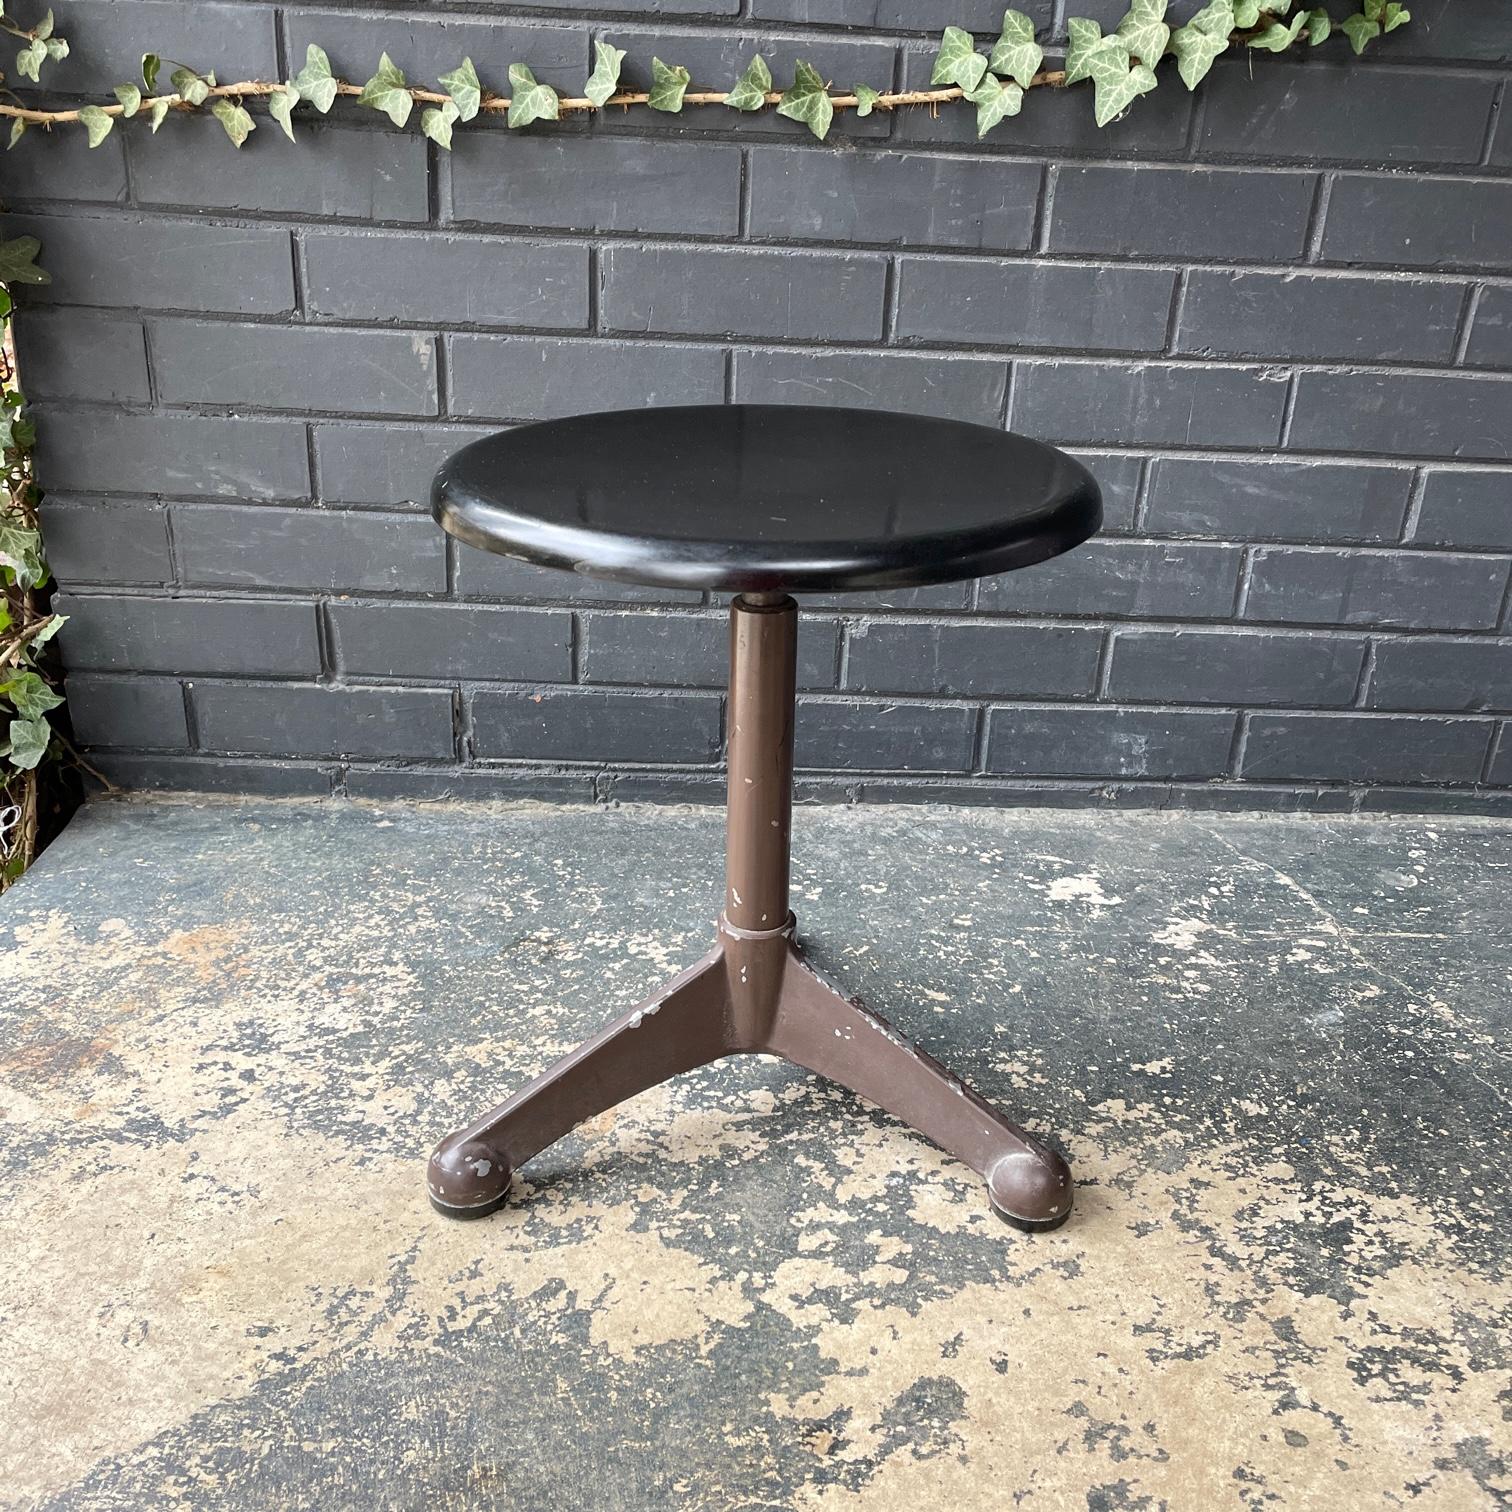 Design is in the manner of Jean Prouve for AB Odelberg-Olsen. Interesting mold markings to the bottom, could not find anything on the mark. These stool was manufactured in Eastern Europe.

The top has a 2.5 inch chip repair that is visible upon